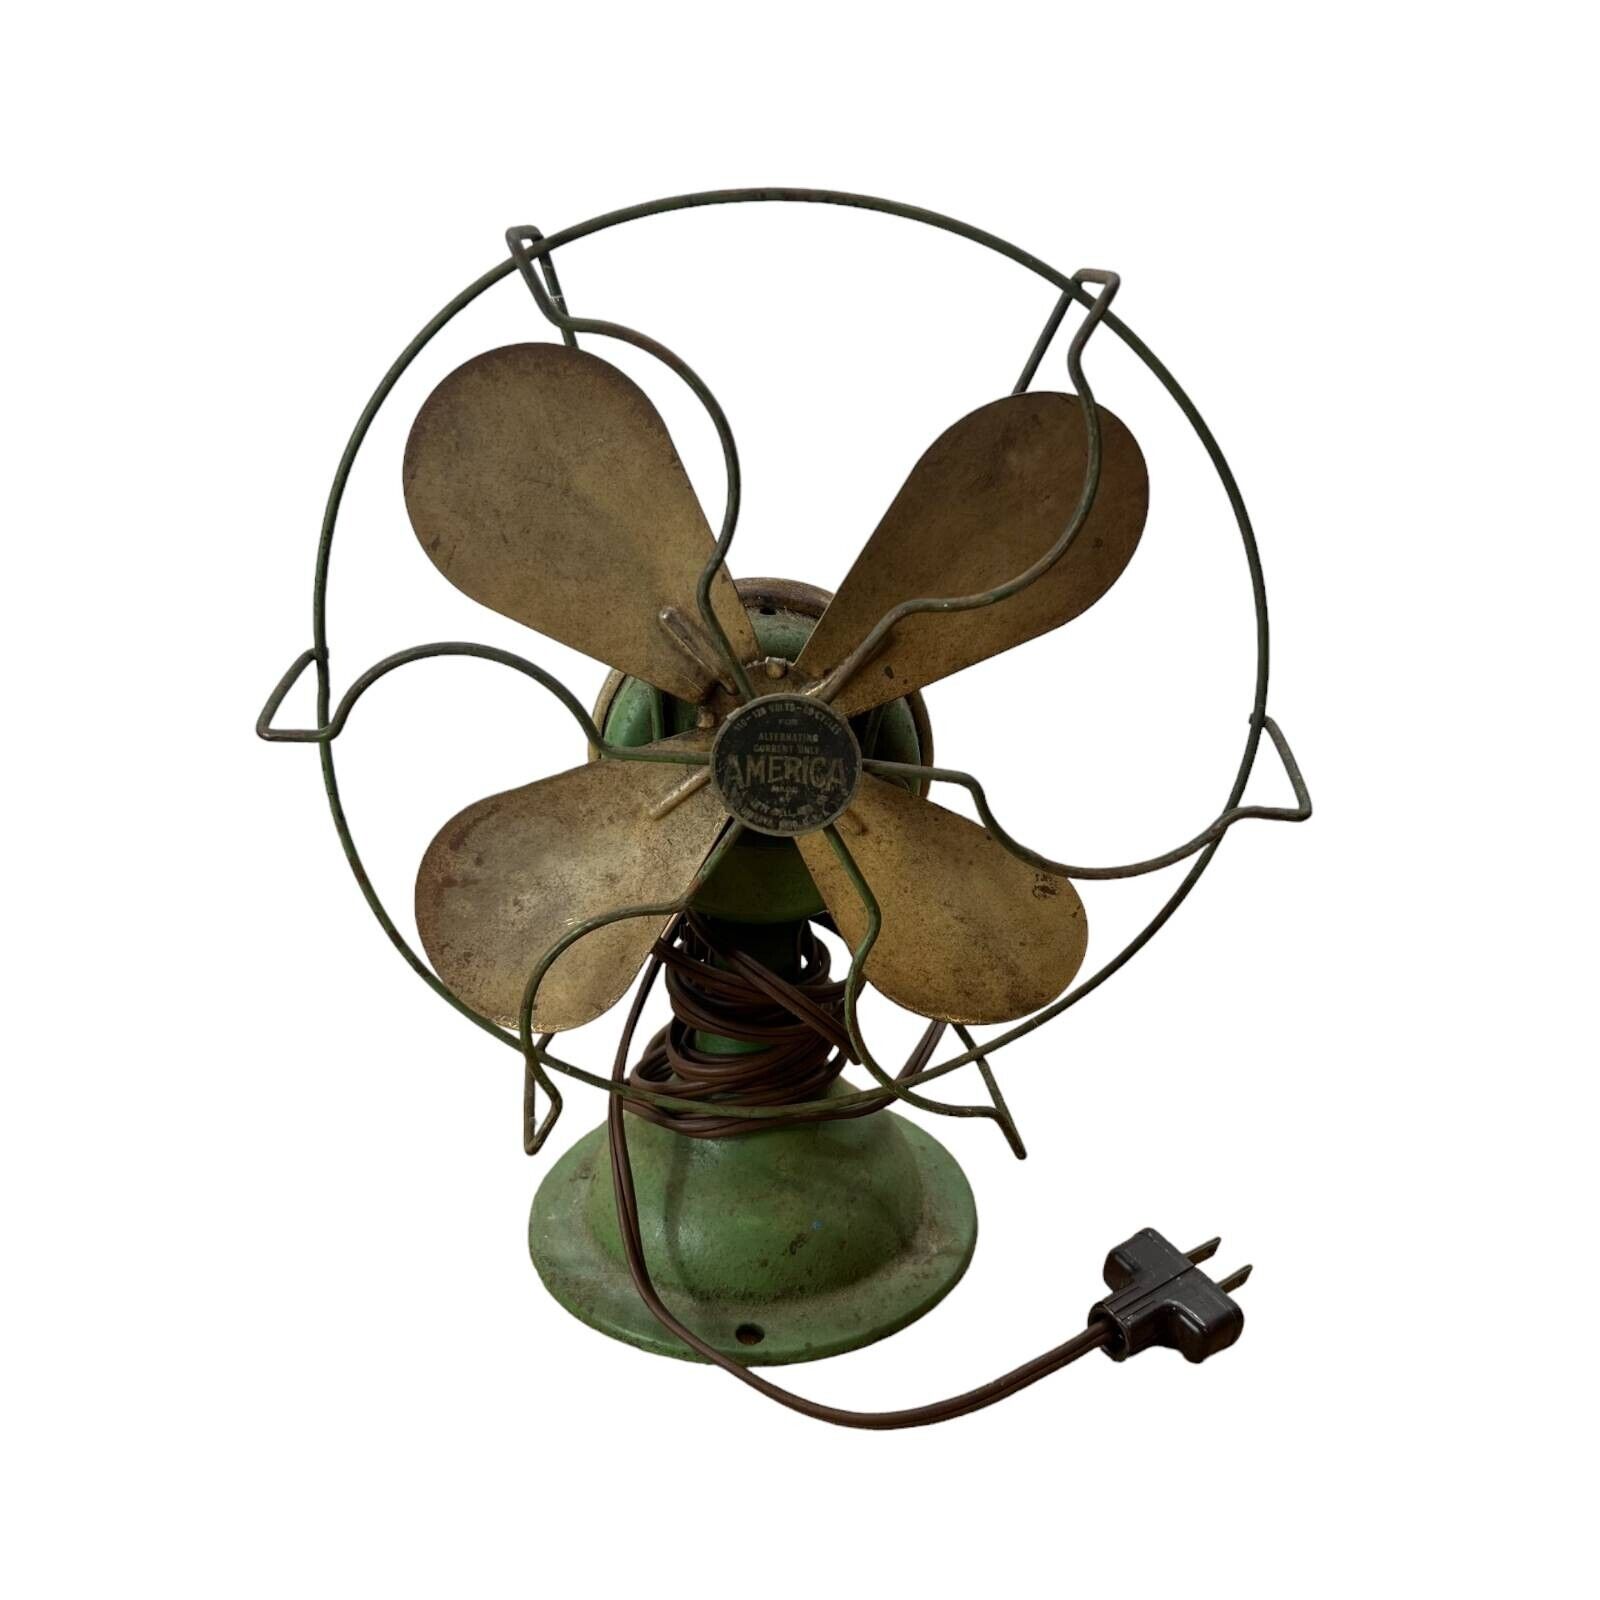 Vintage Liberty Bell America Metal Table Fan Green Corded Electric Tested